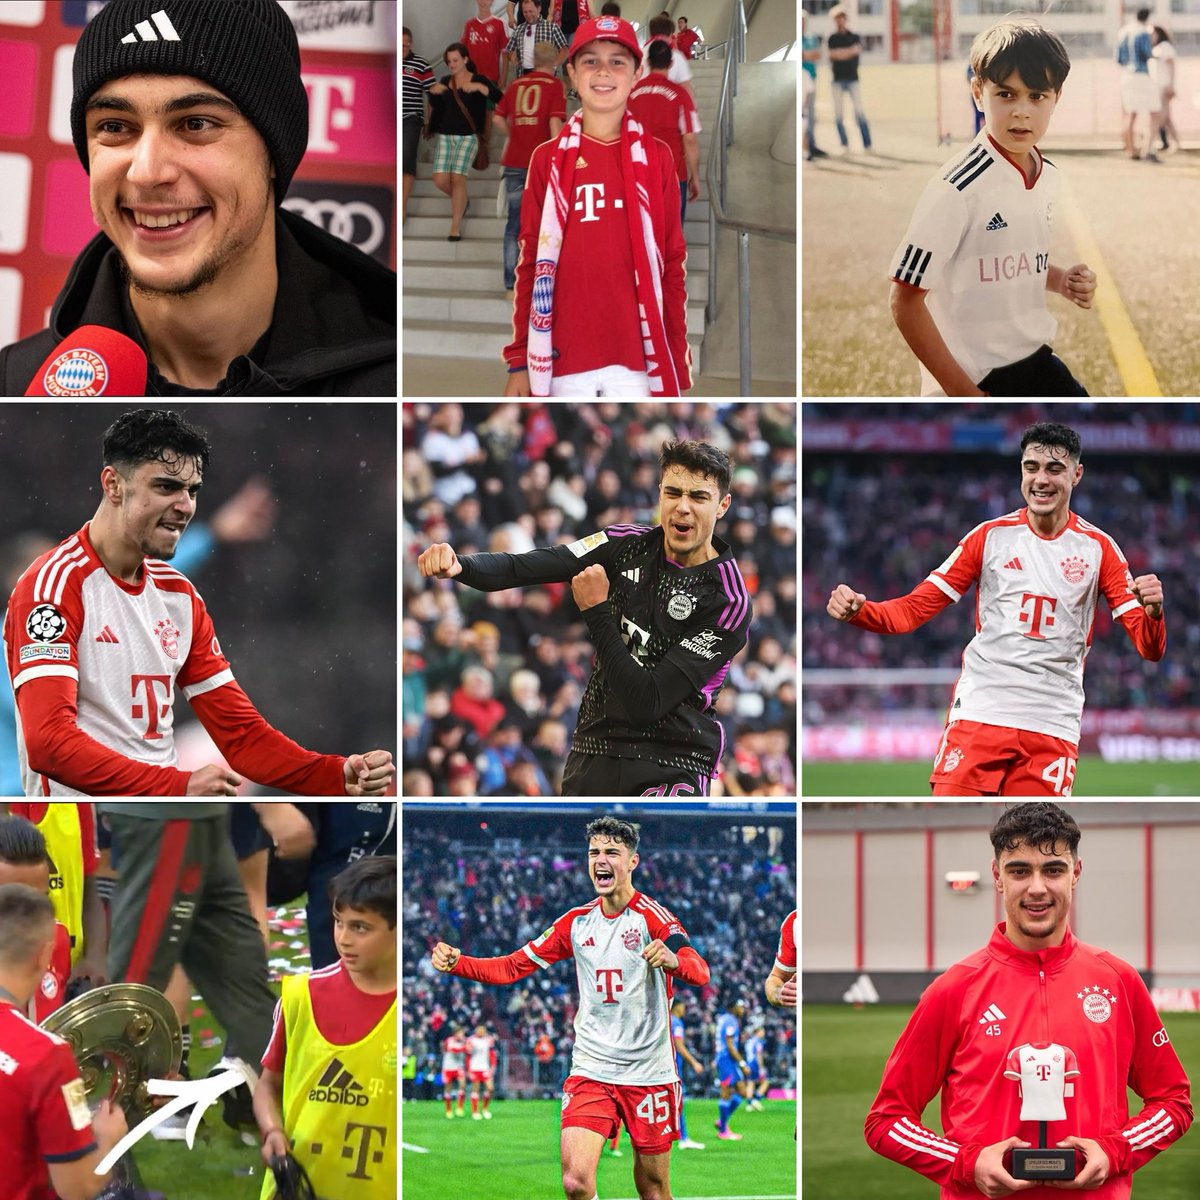 Happy 20th birthday Aleksandar Pavlovic. You are the best thing that has happened us this season so far, what an incredibly great player you are. One of us, from our own youth, the future of the club.❤️🎉